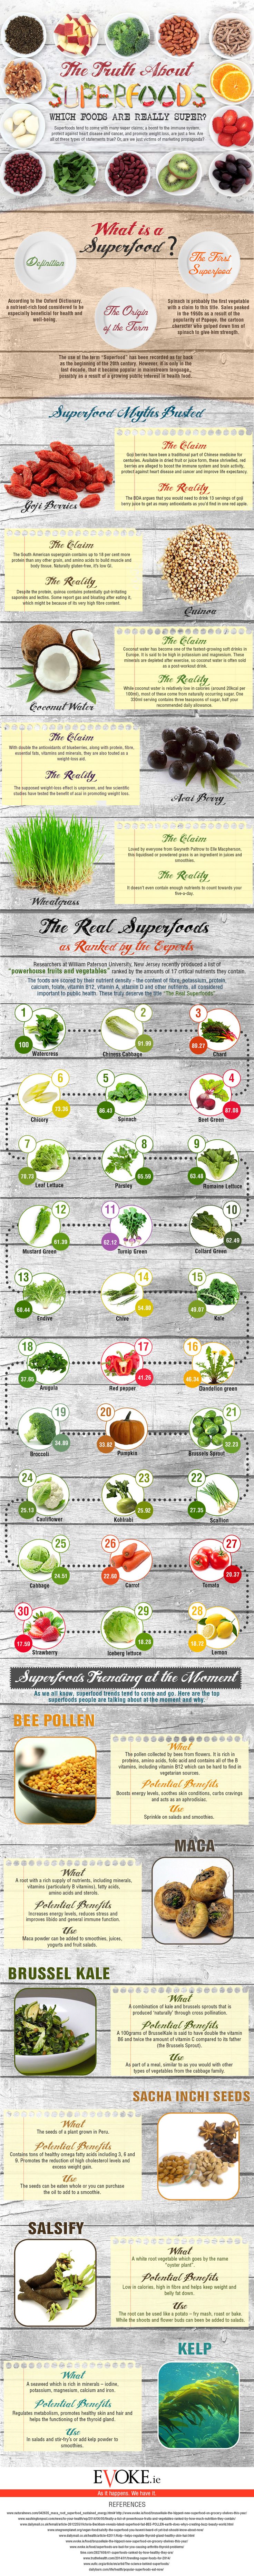 The Truth About Superfoods [Infographic]